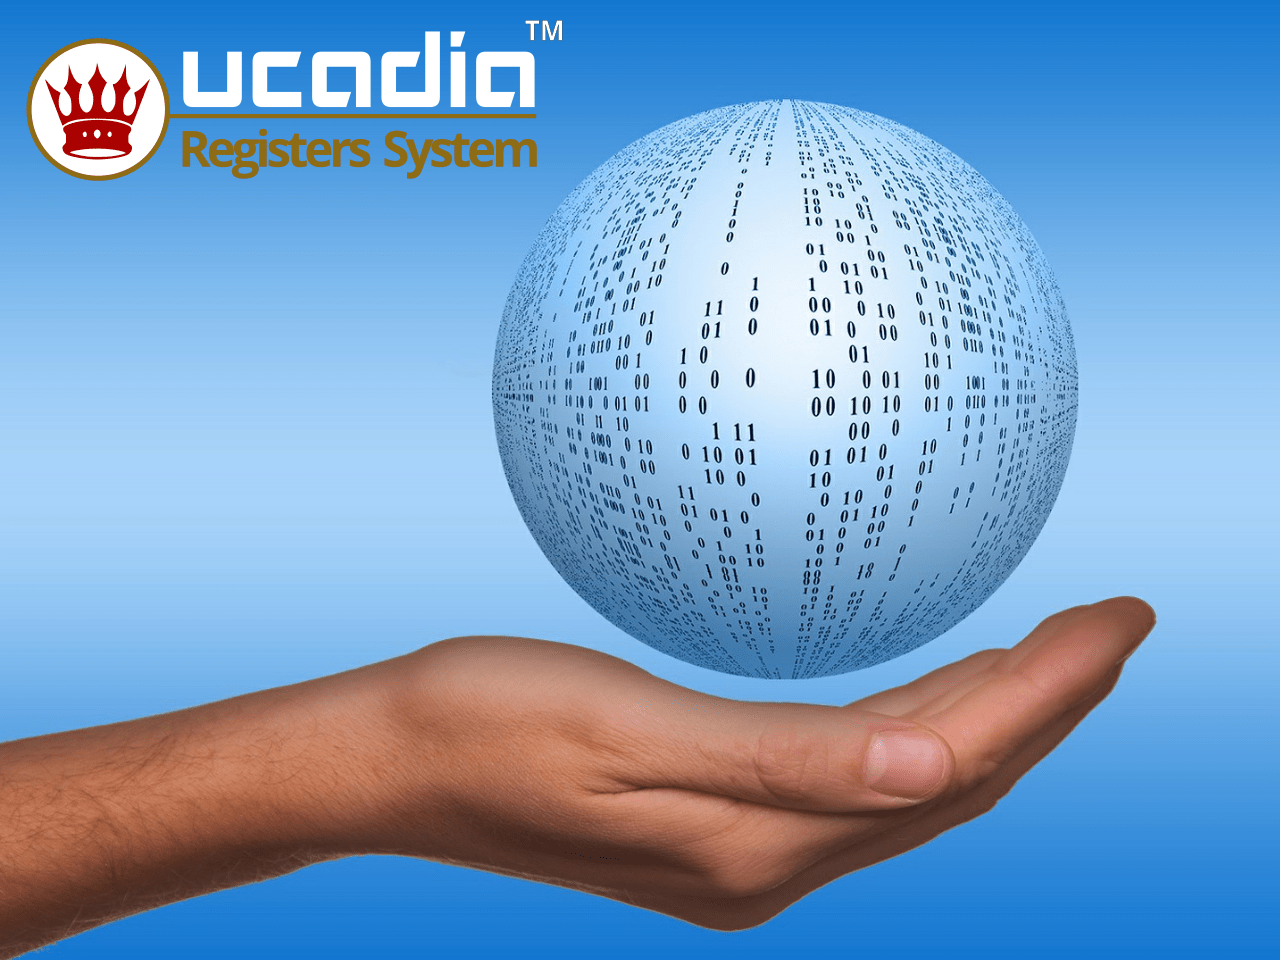 About Ucadia Registers System